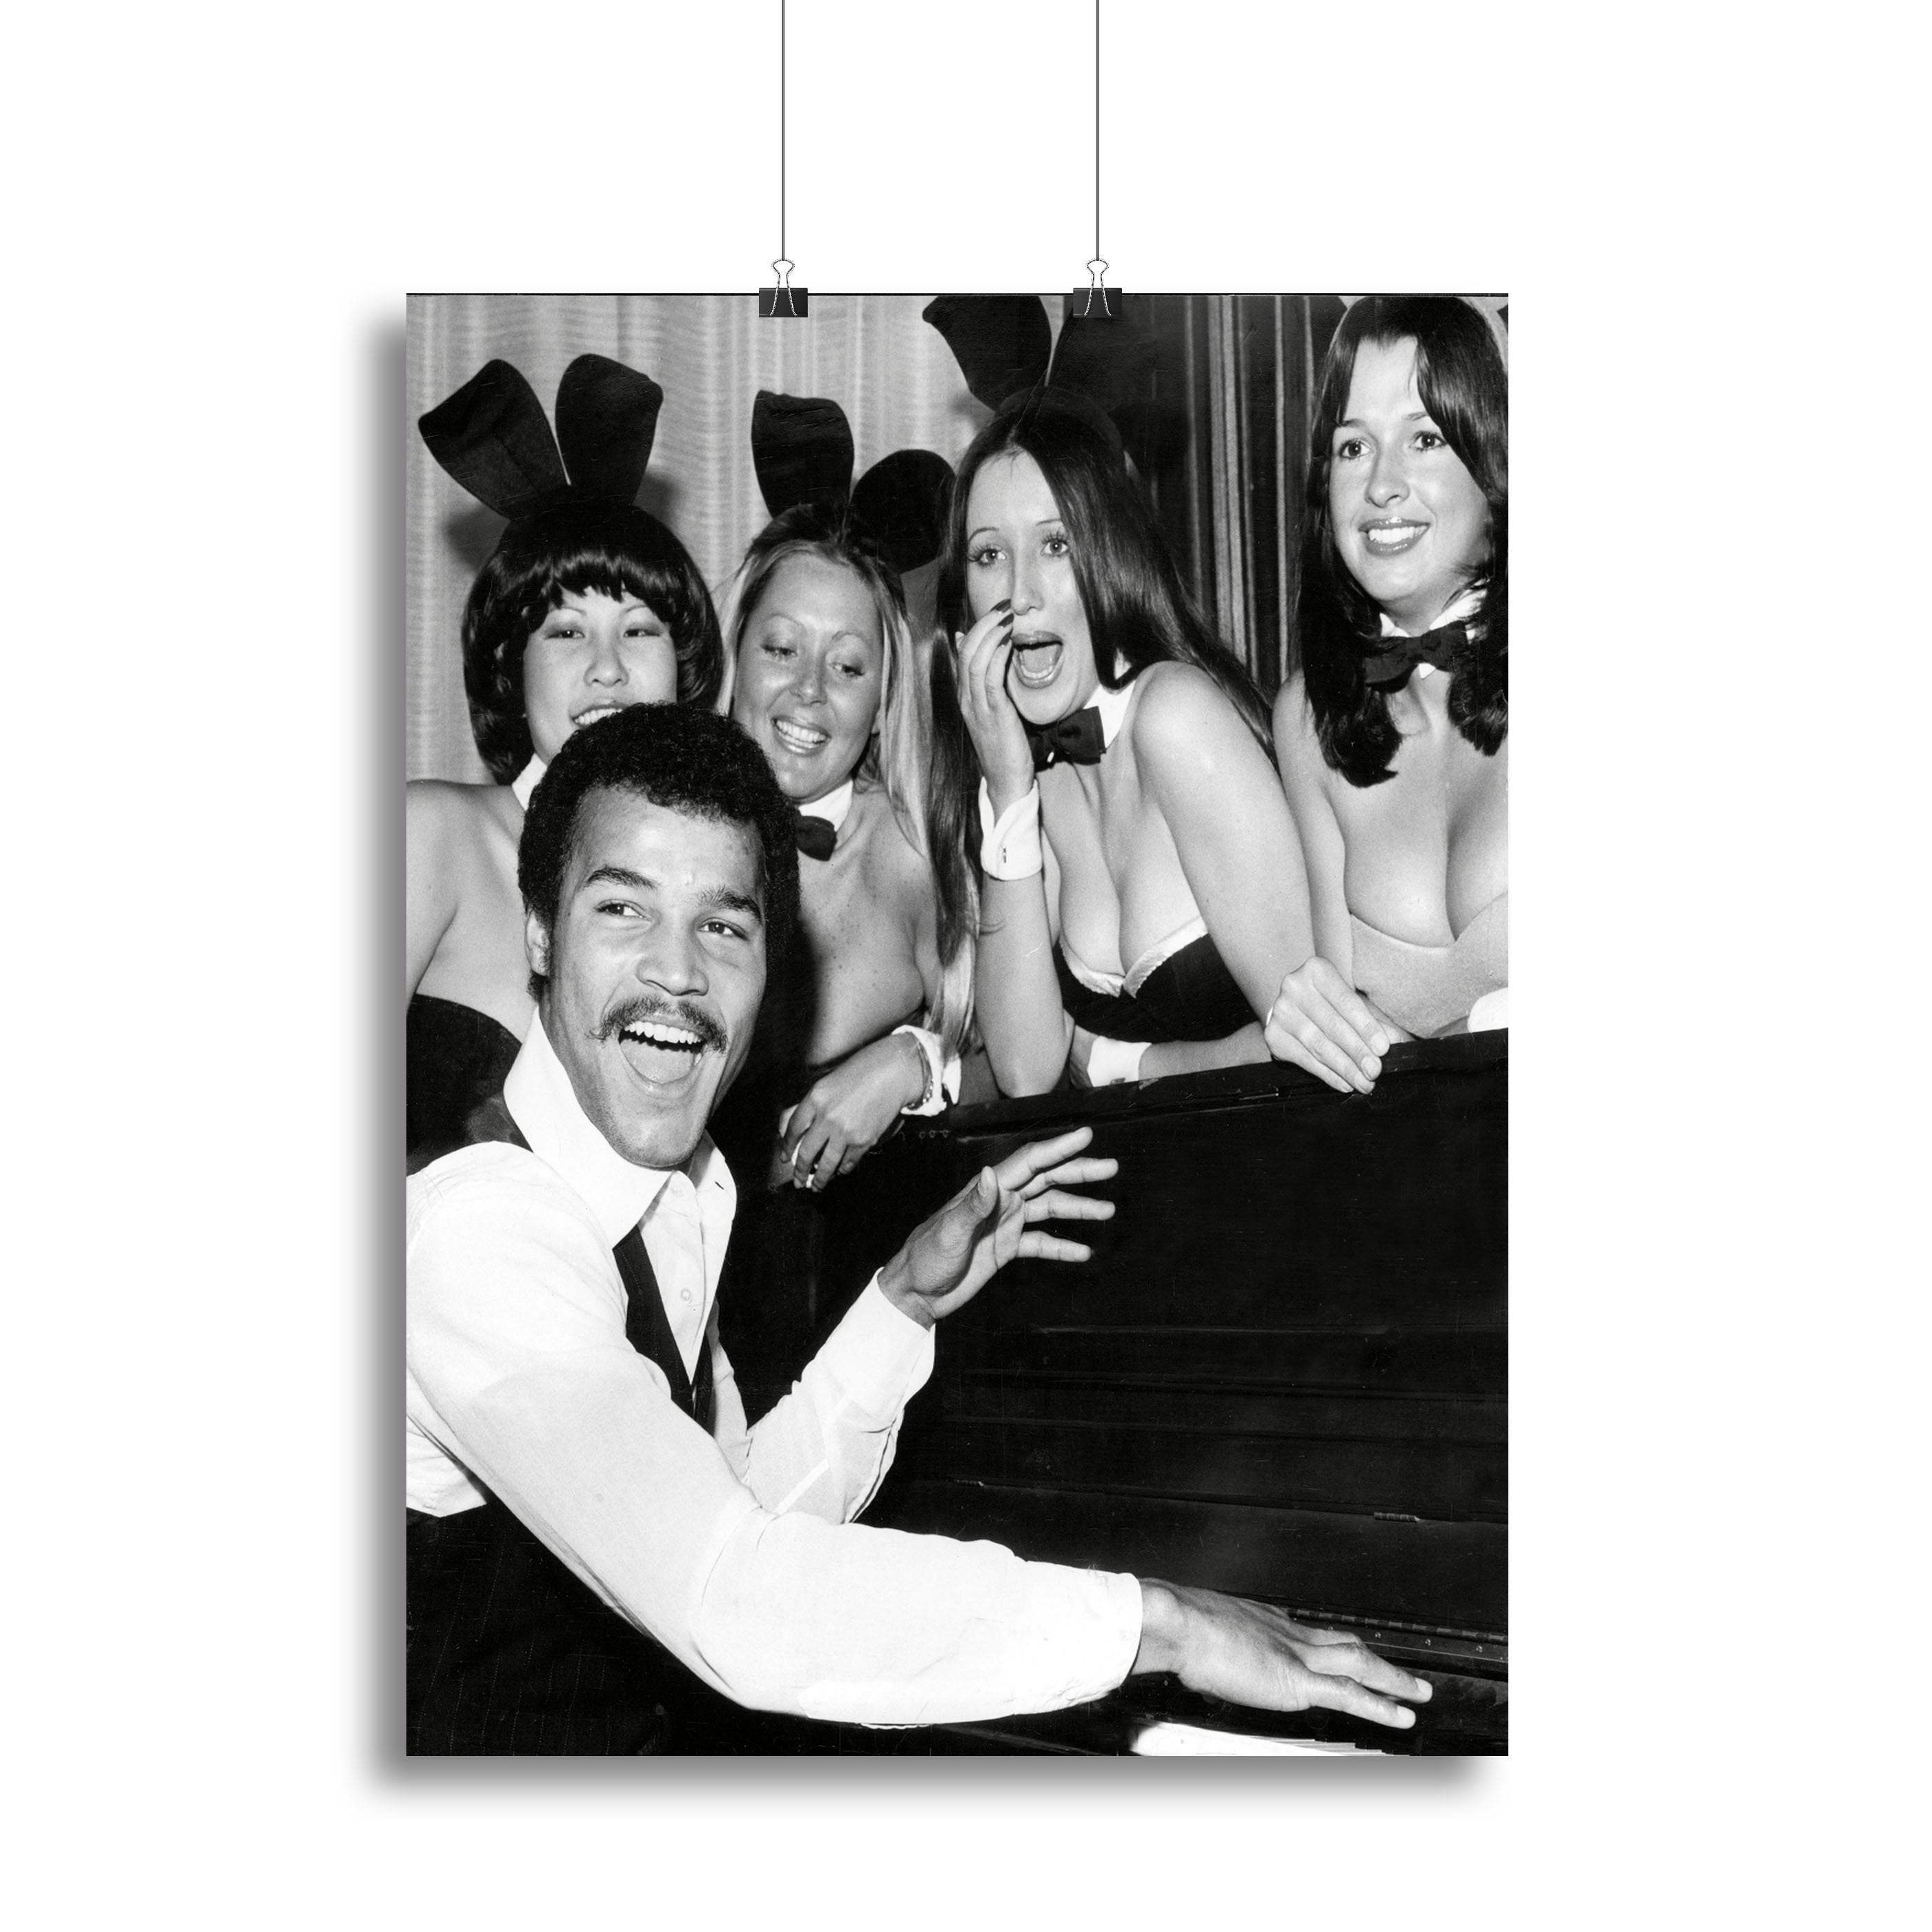 Boxer John Conteh with bunny girls at the playboy club Canvas Print or Poster